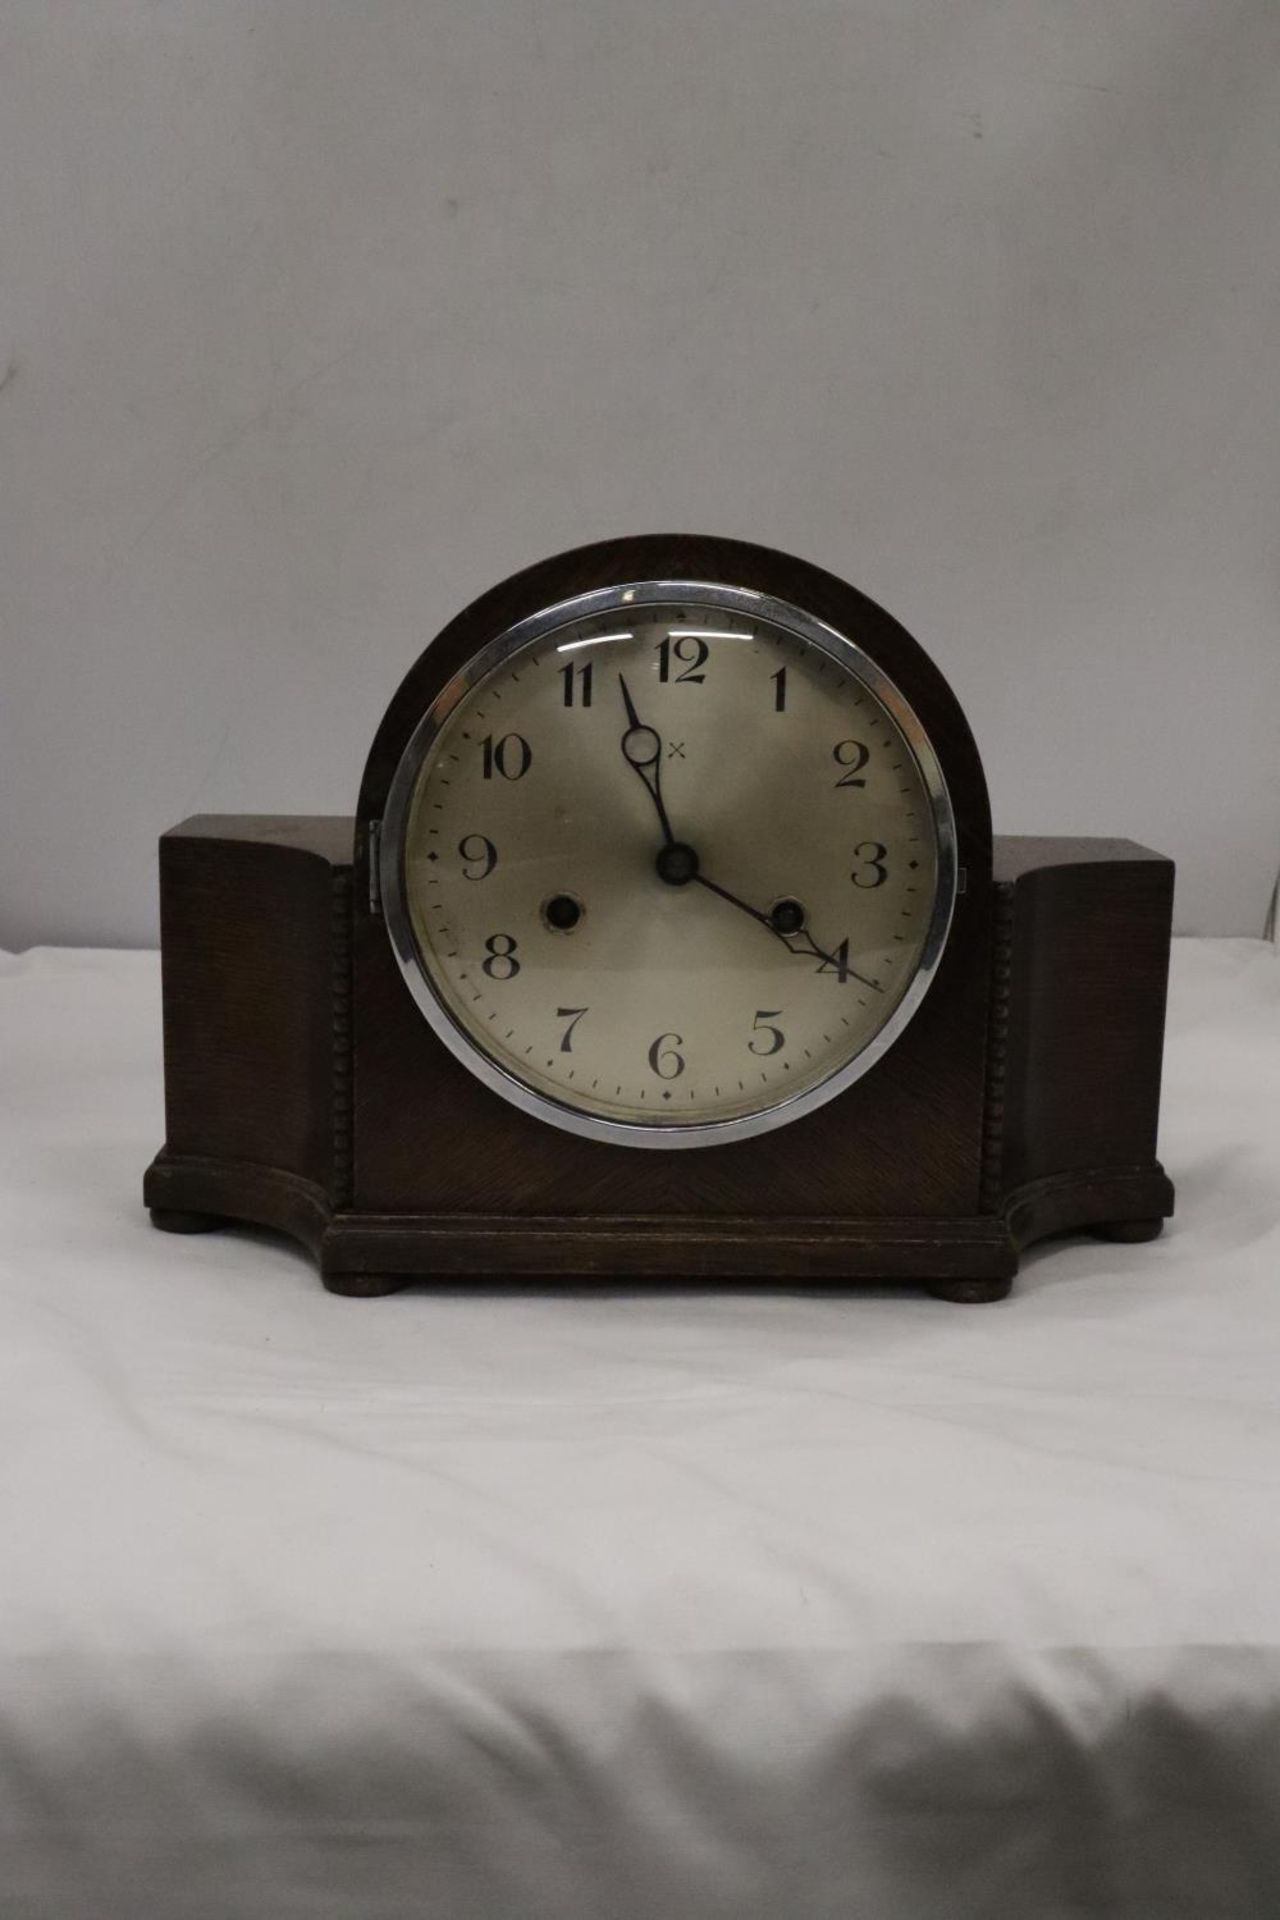 A VINTAGE GERMAN MANTLE CLOCK IN WORKING ORDER AT CATALOGUING, NO WARRANTY GIVEN